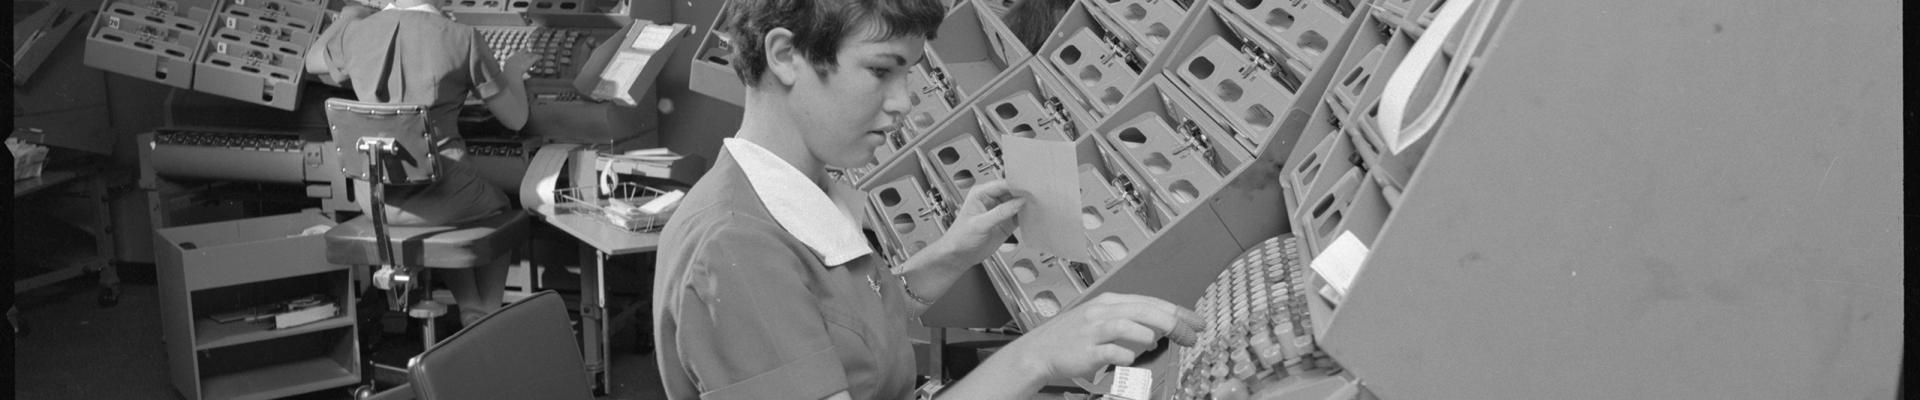 Staff operating punch card machines 1969